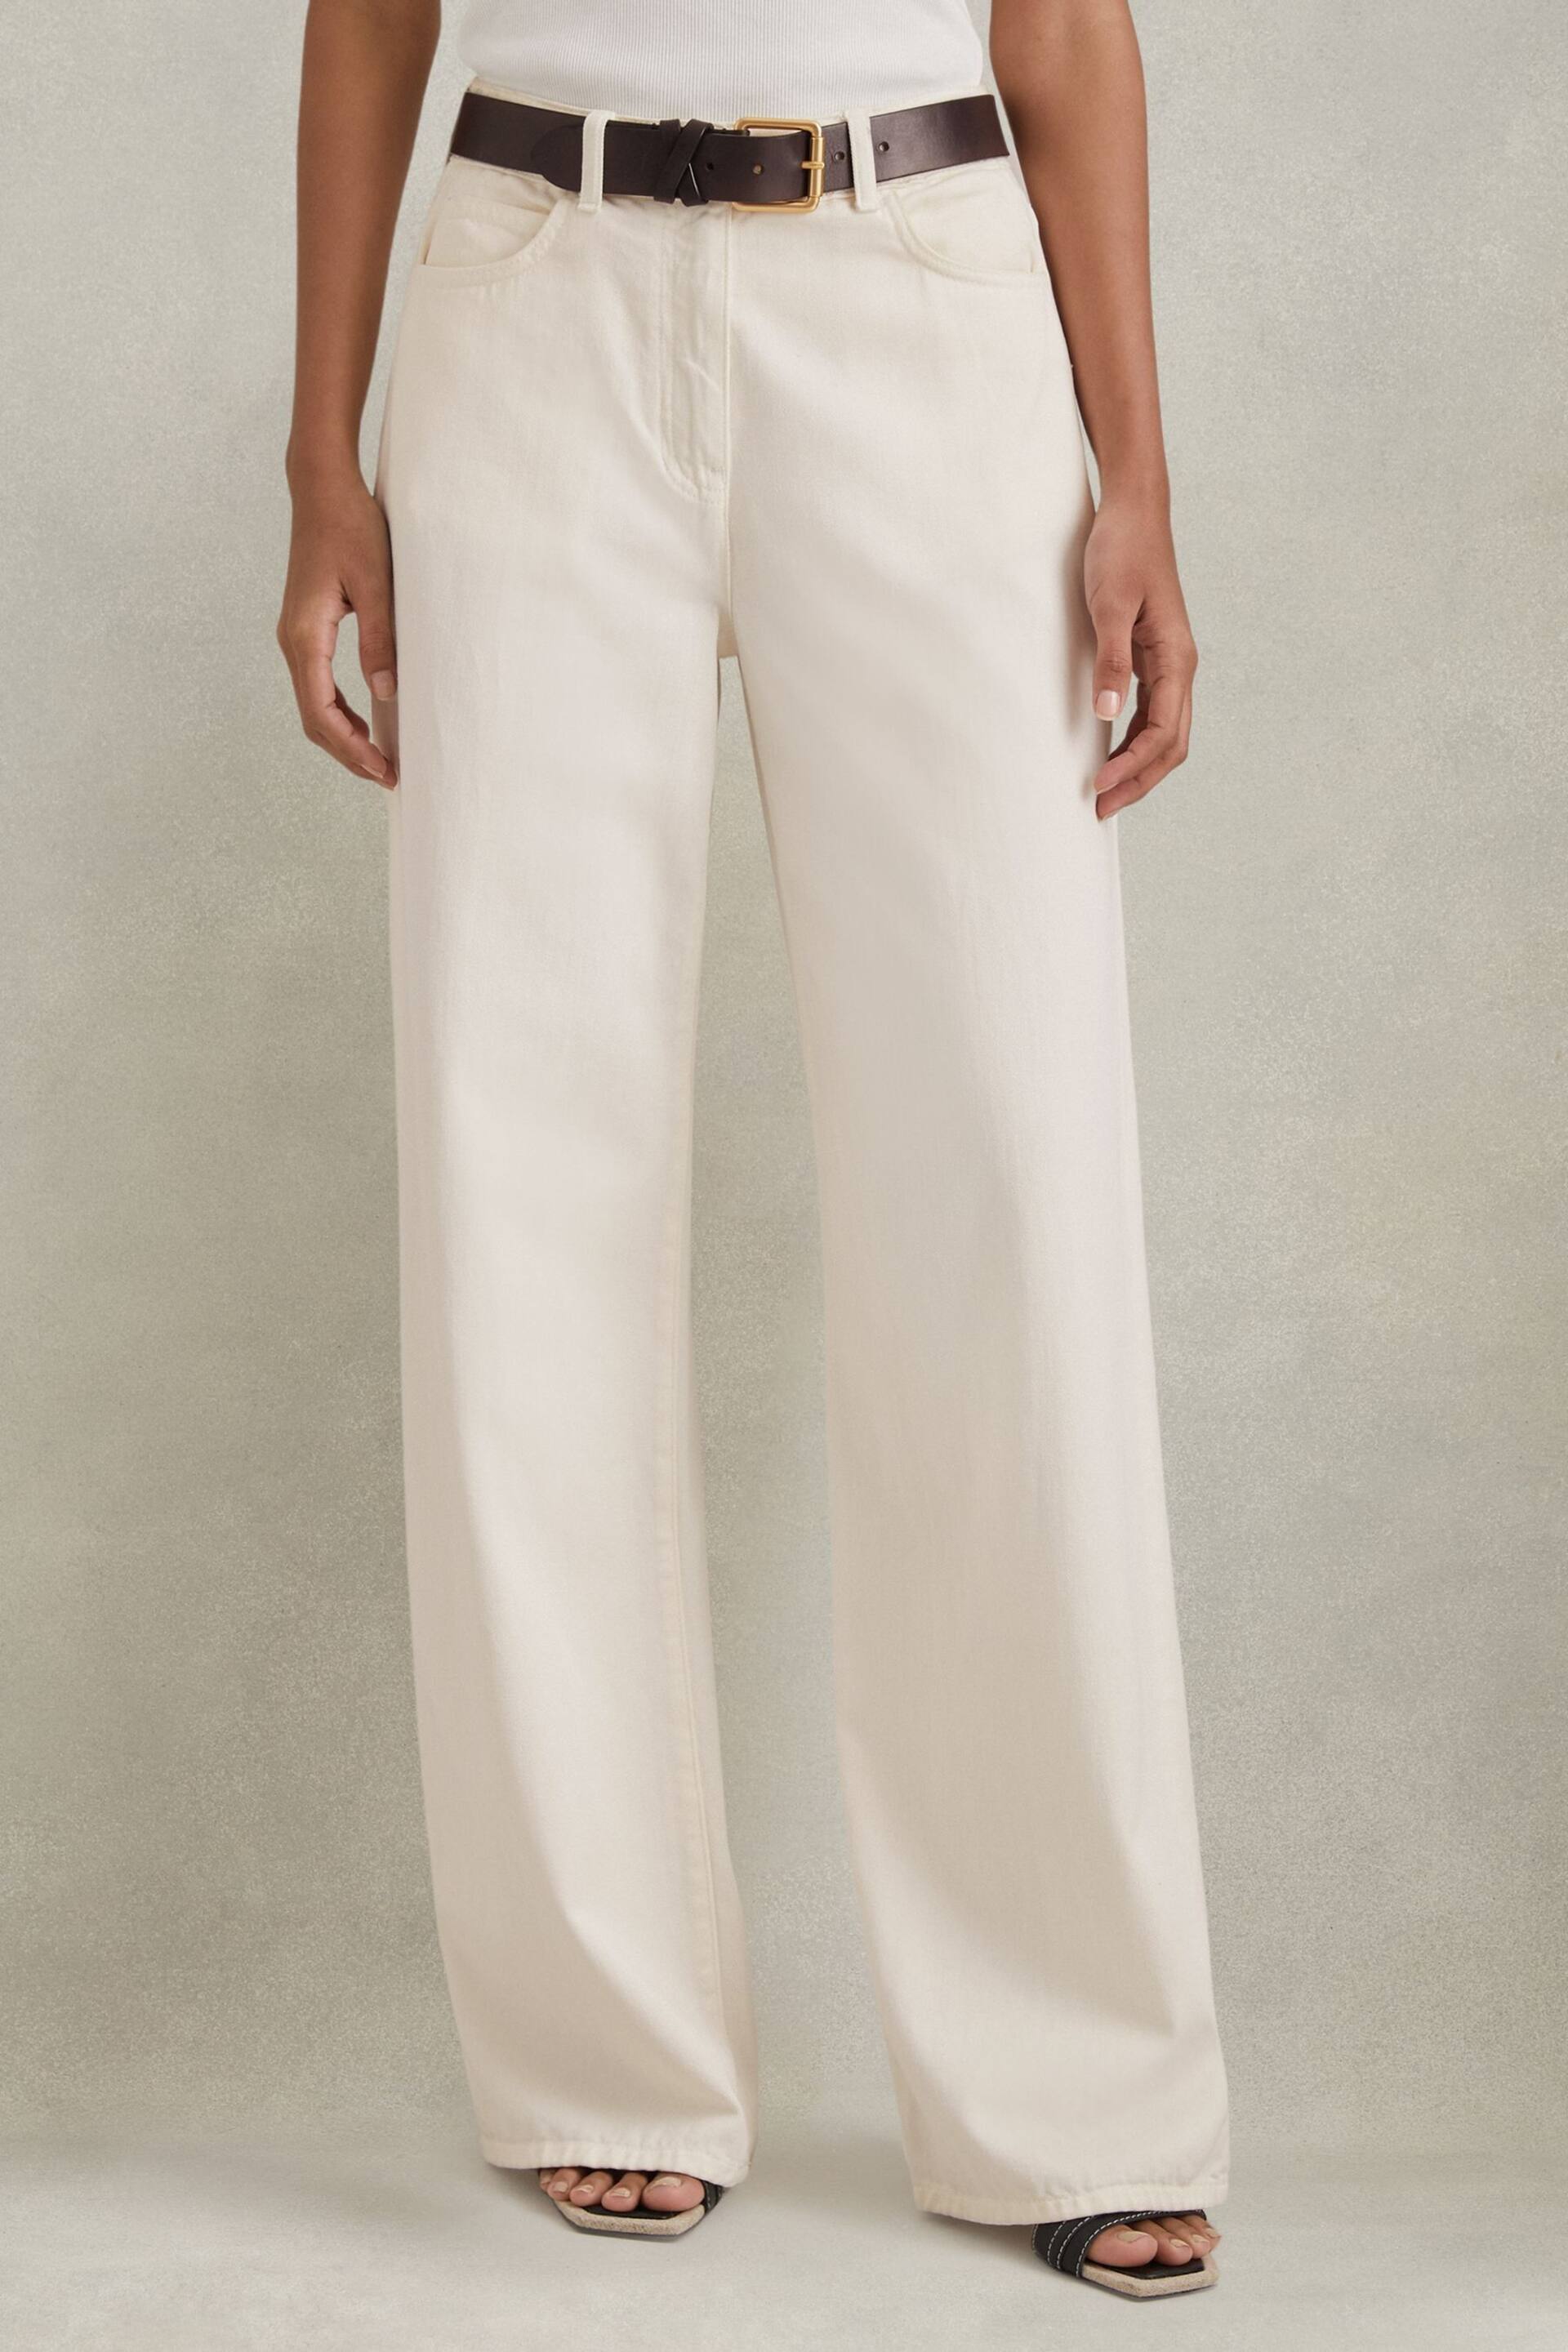 Reiss Cream Colorado Garment Dyed Wide Leg Trousers - Image 3 of 6